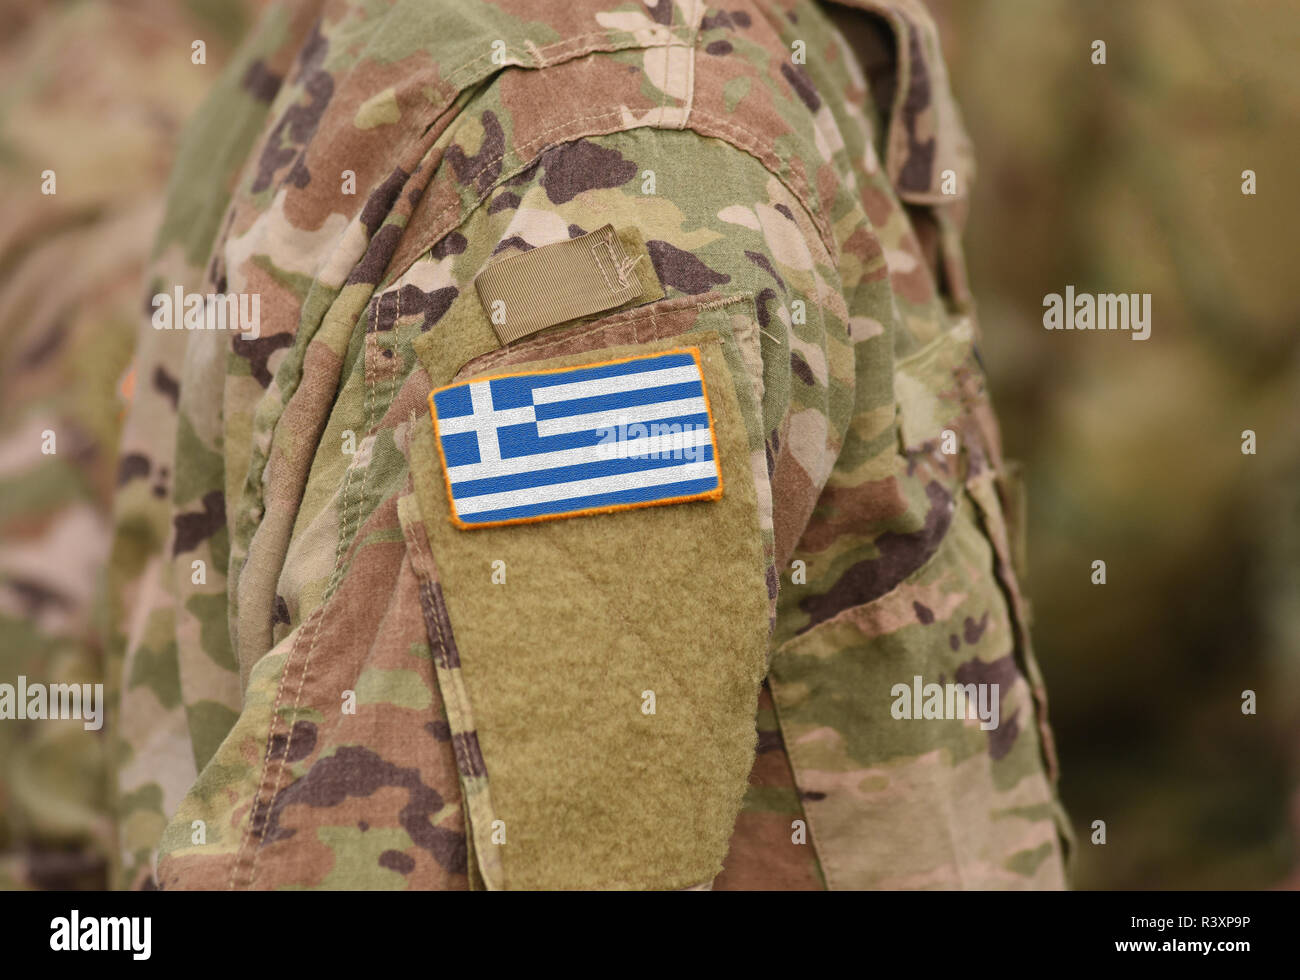 Greece flag on soldiers arm (collage). Stock Photo